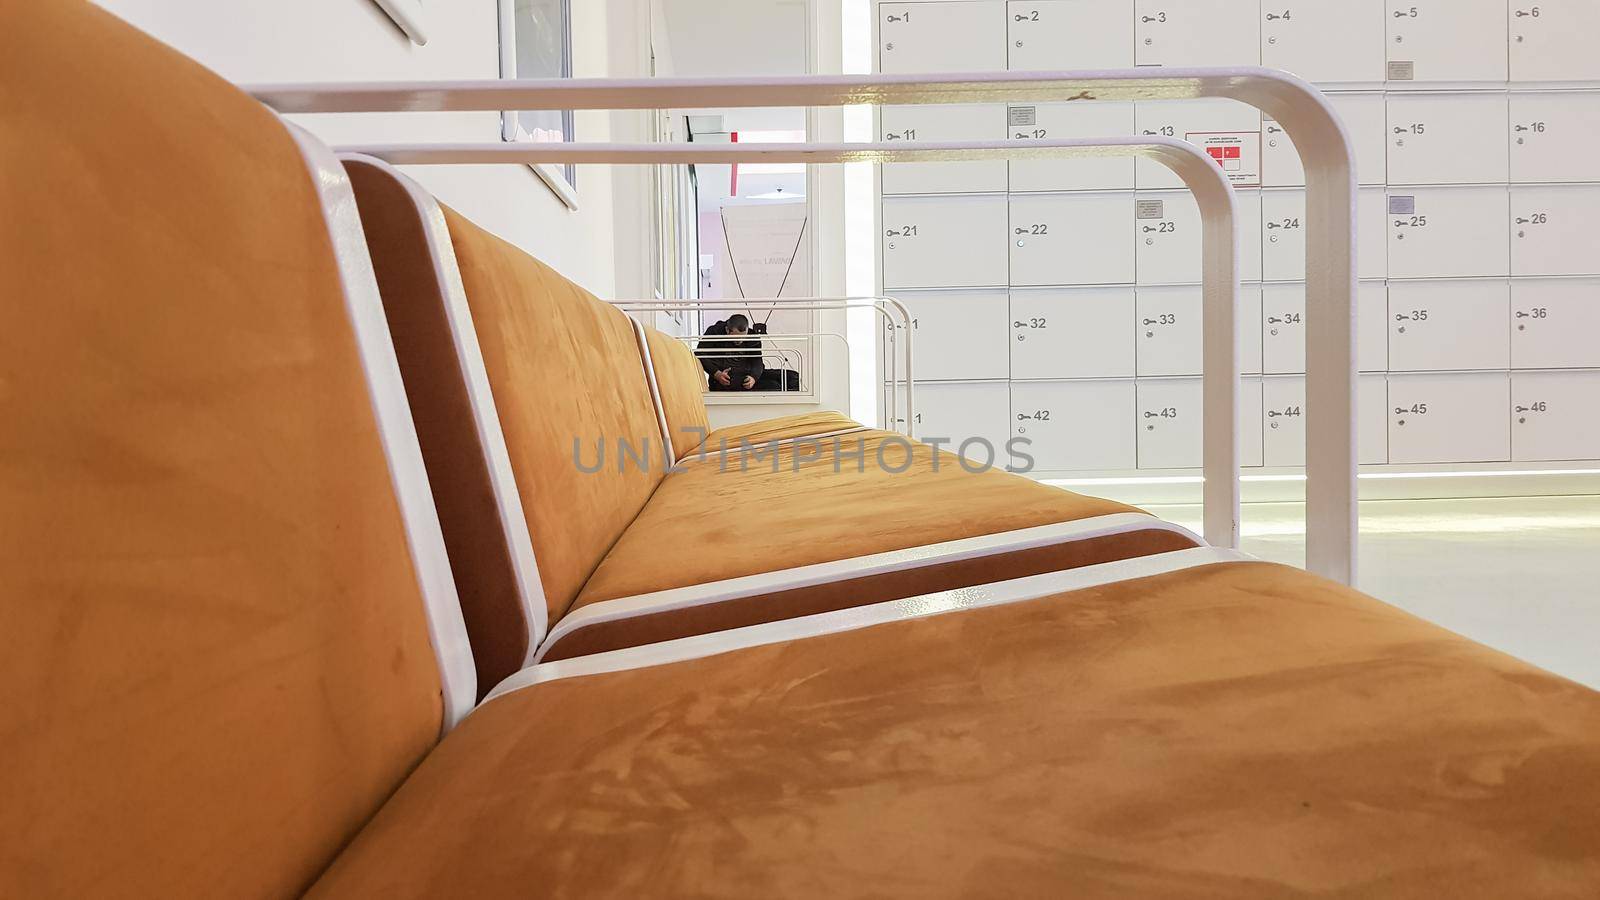 close-ups of benches upholstered in brown suede or leather with white metal railing in a cinema waiting room in a shopping center by Roshchyn